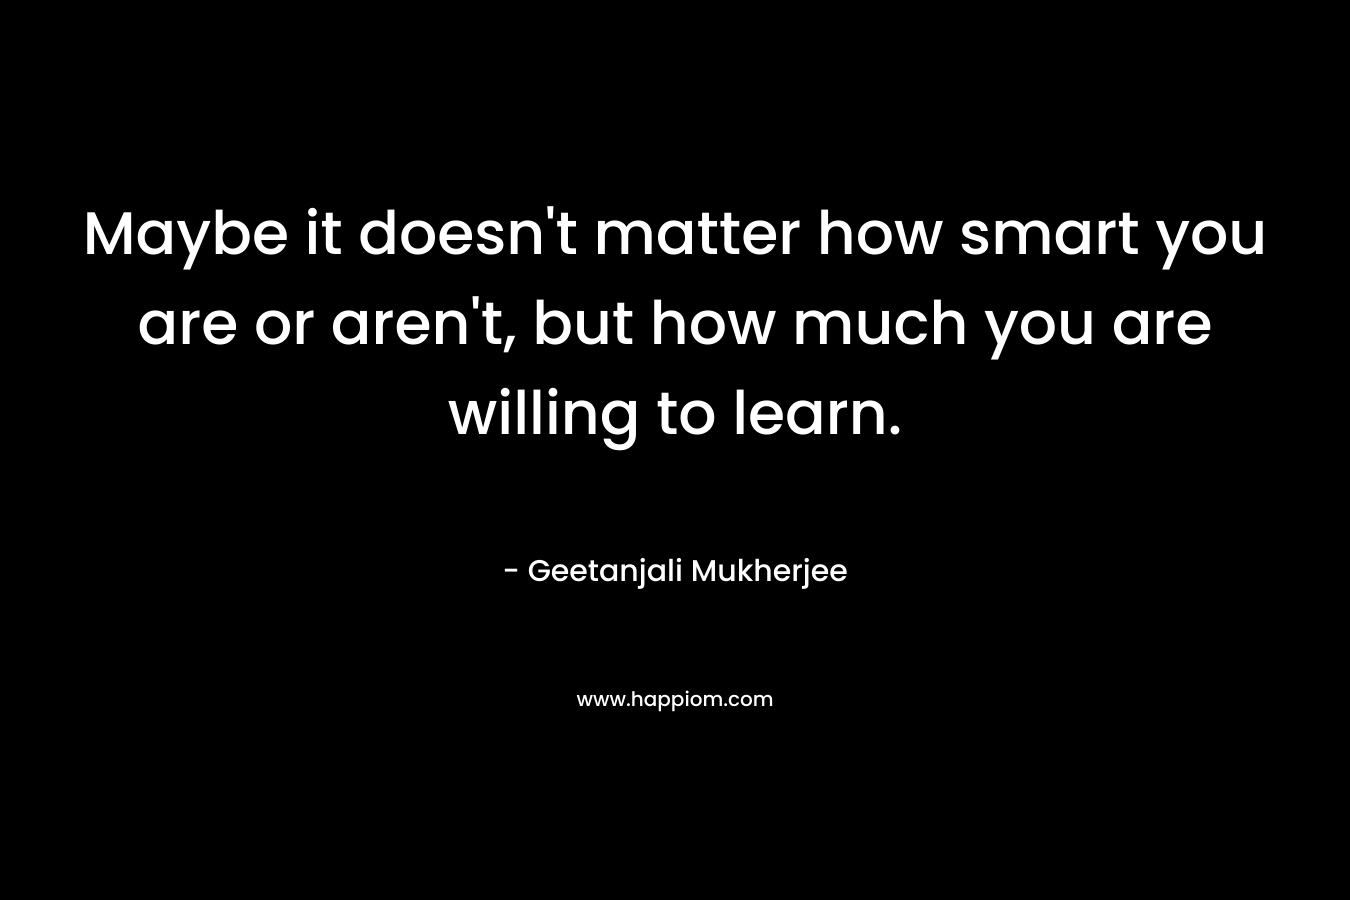 Maybe it doesn’t matter how smart you are or aren’t, but how much you are willing to learn. – Geetanjali Mukherjee